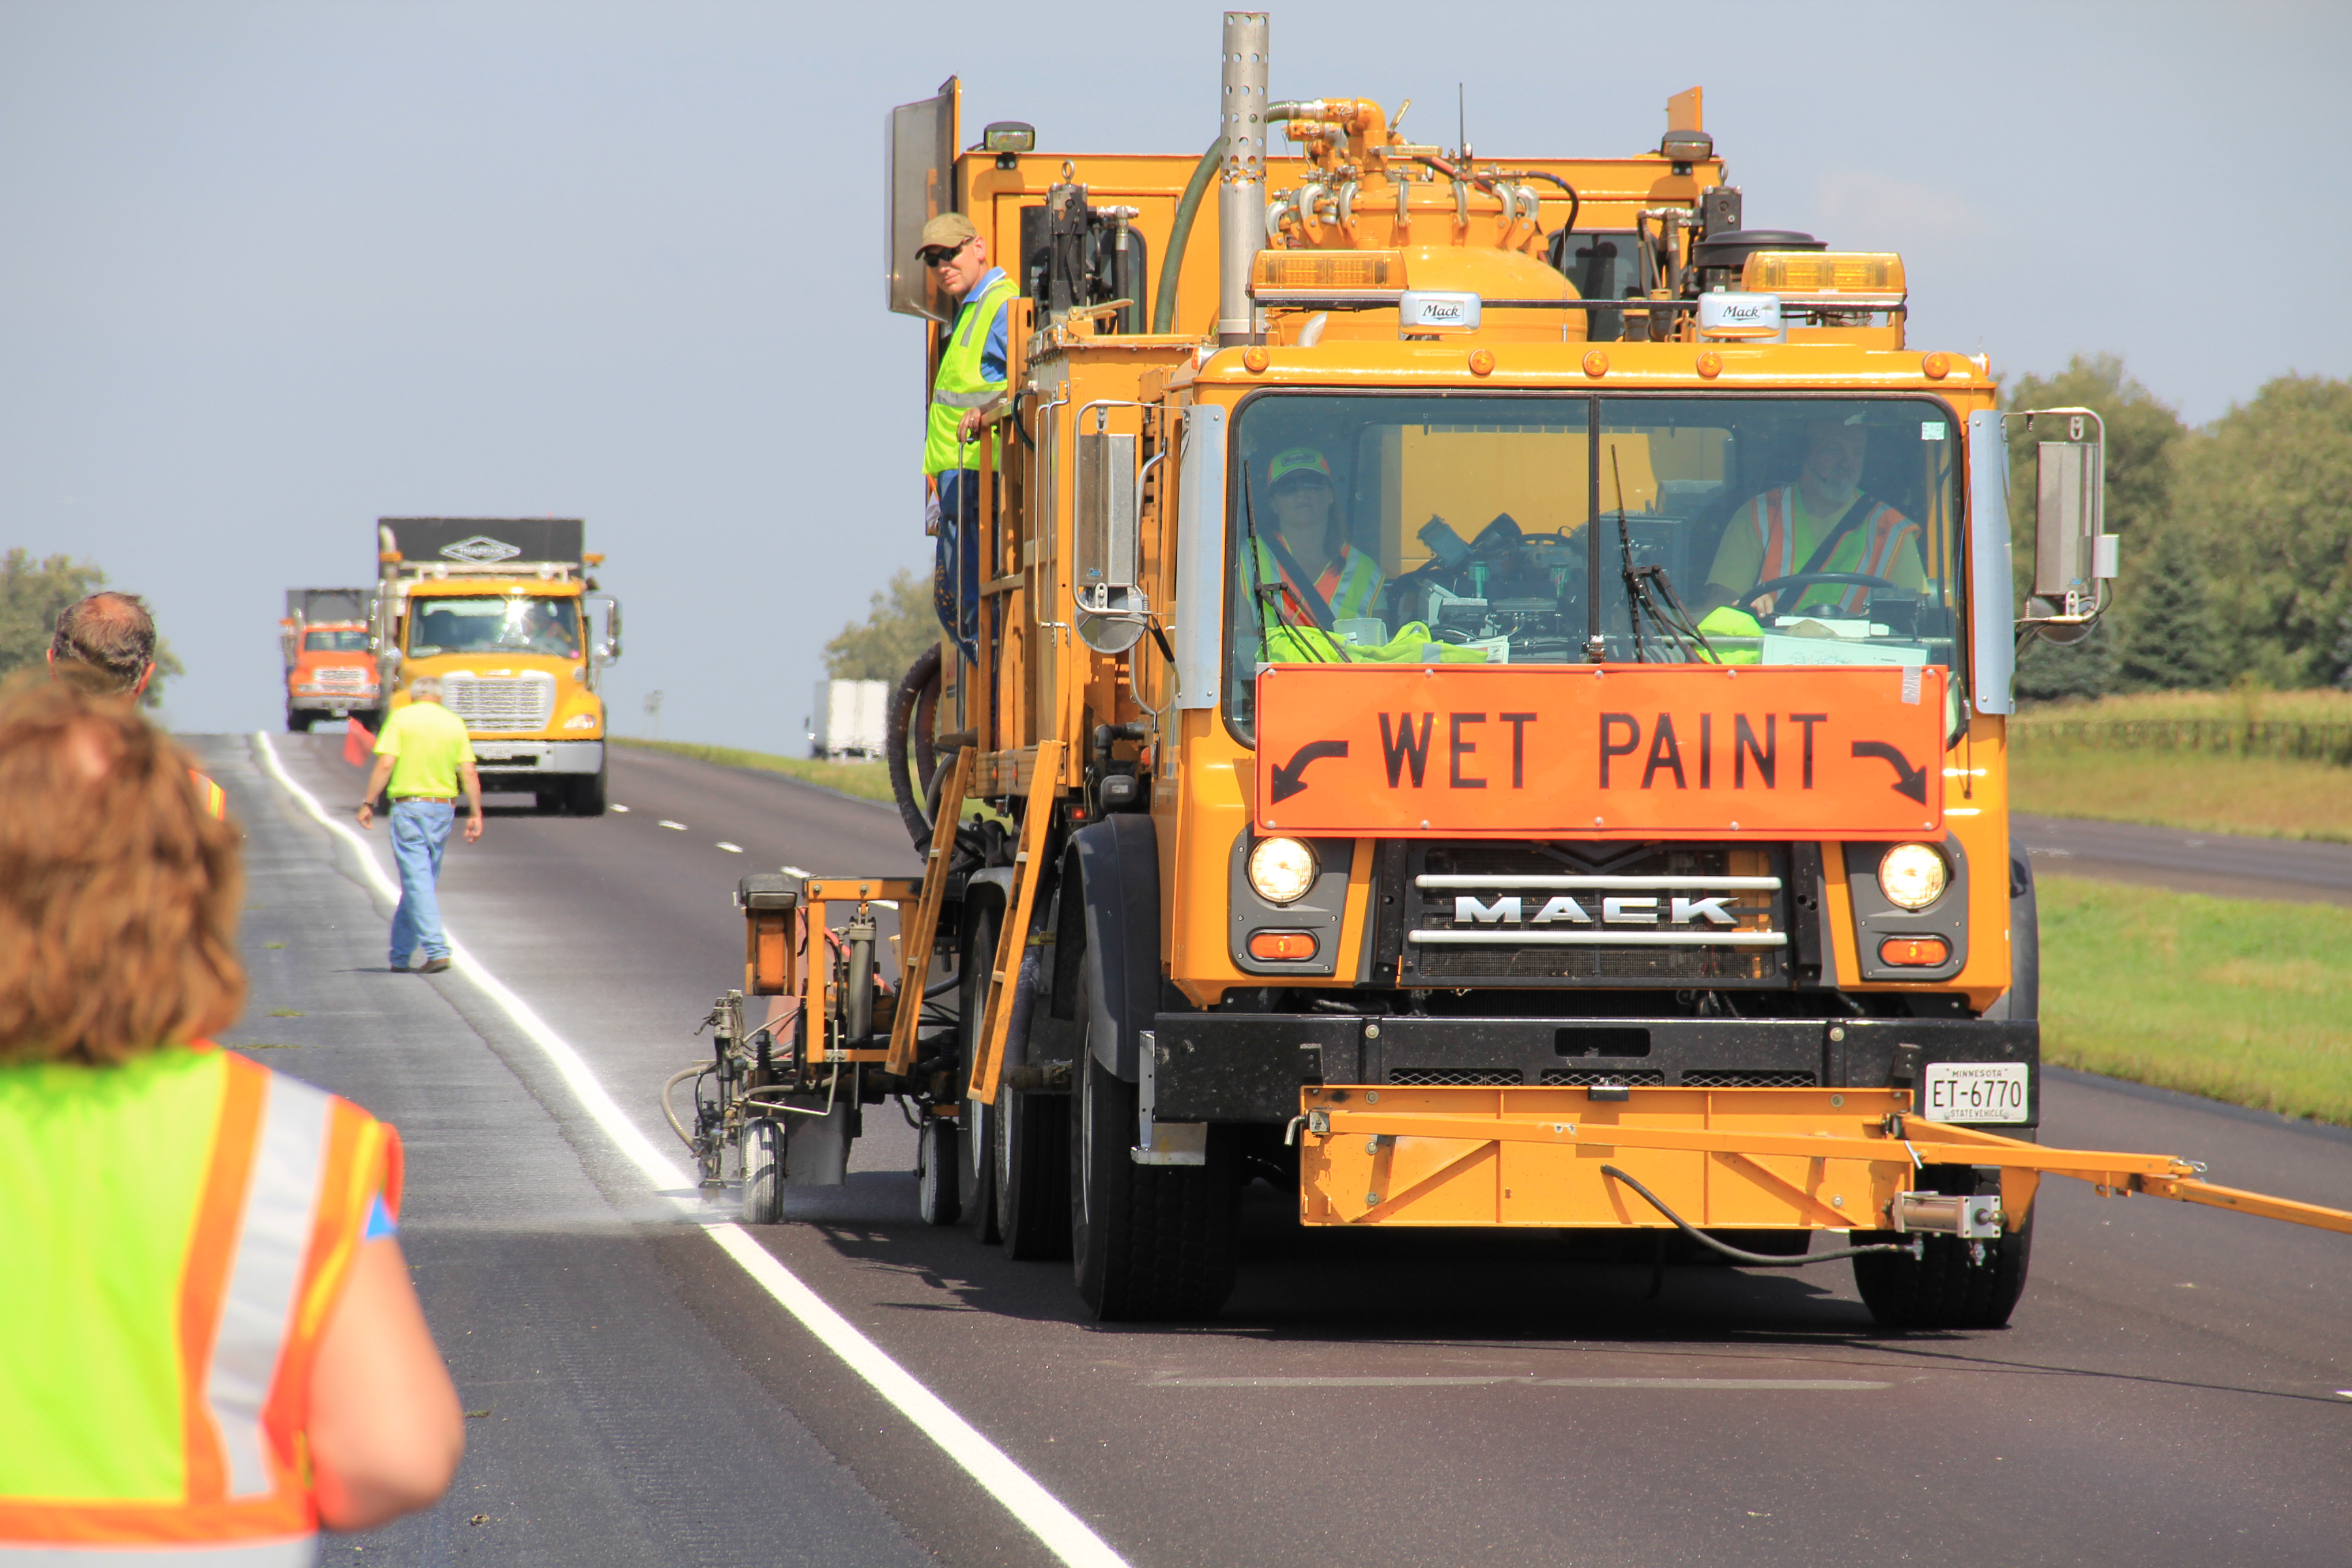 Pavement Markings: Epoxy Paints and Thick Coats Perform Best on Challenging Asphalt Surfaces